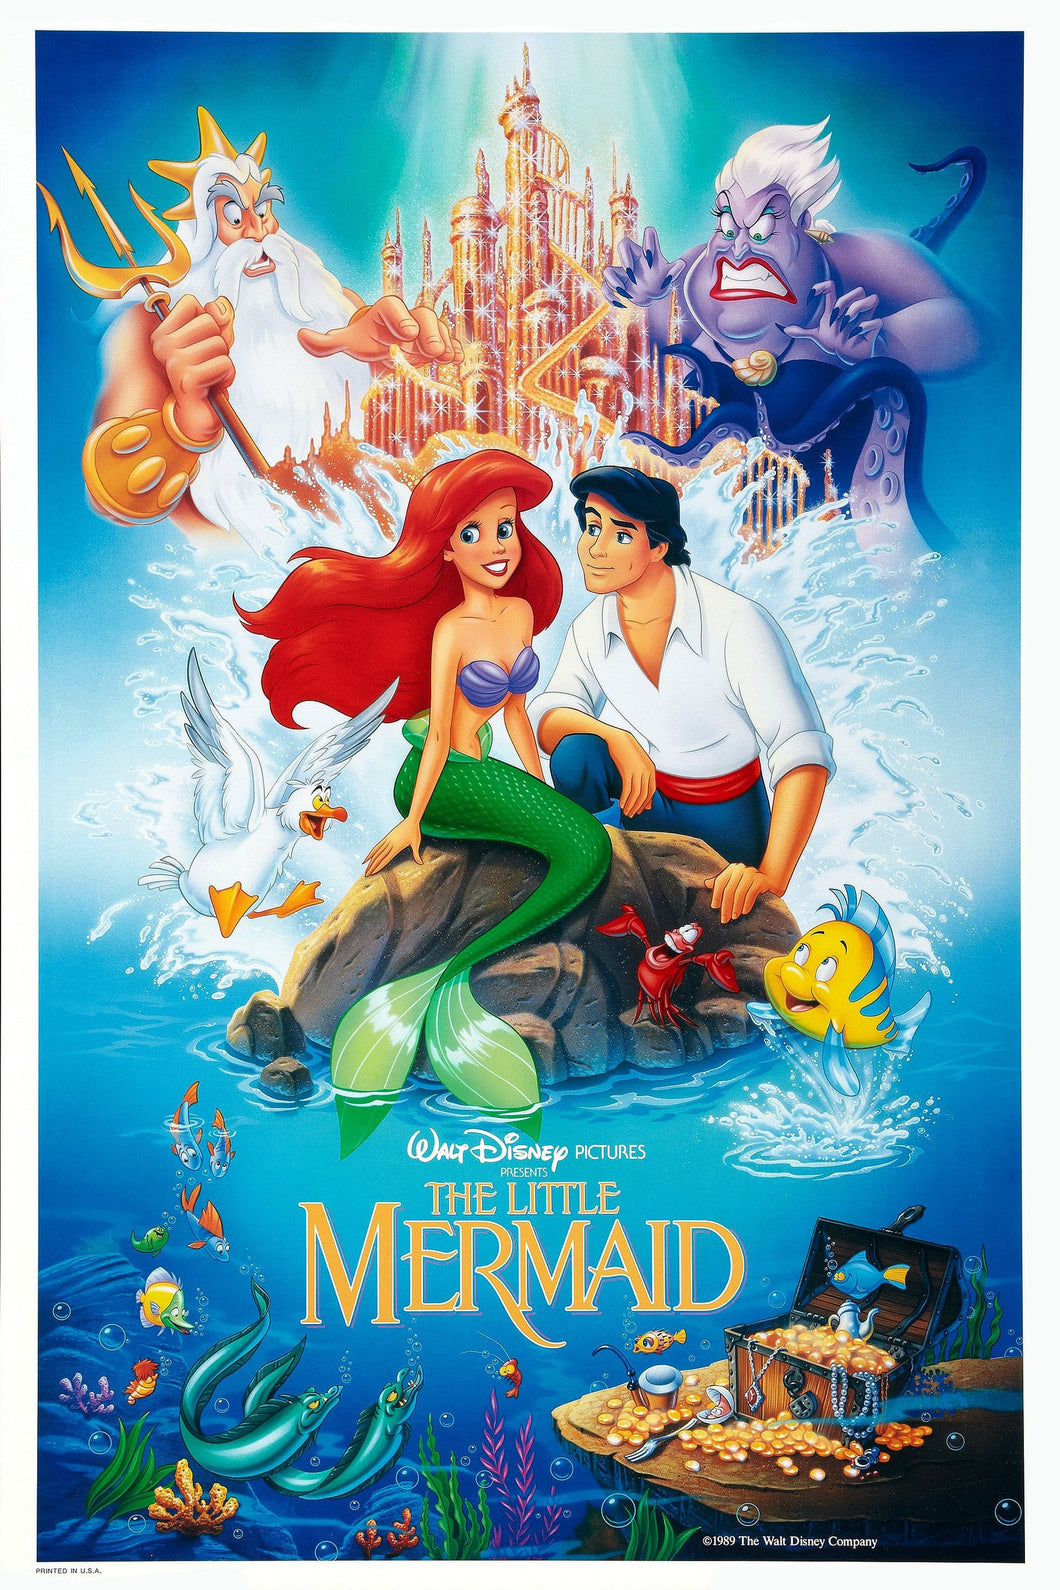 The Little Mermaid (1989) Animated Movie Poster Framed or Unframed Glossy Poster Free UK Shipping!!!